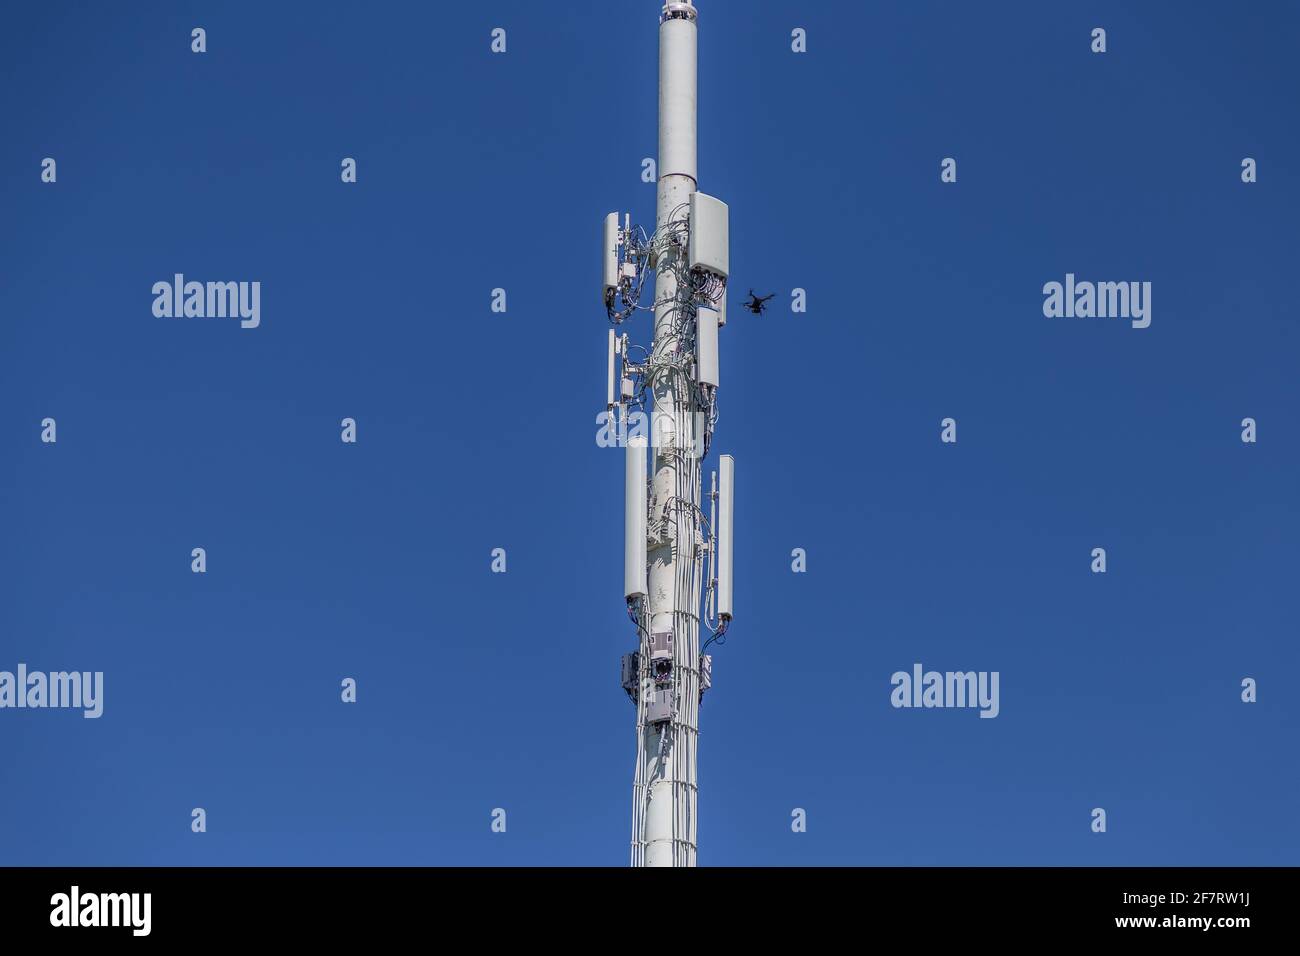 Drone Inspecting upper right of a cell tower Stock Photo